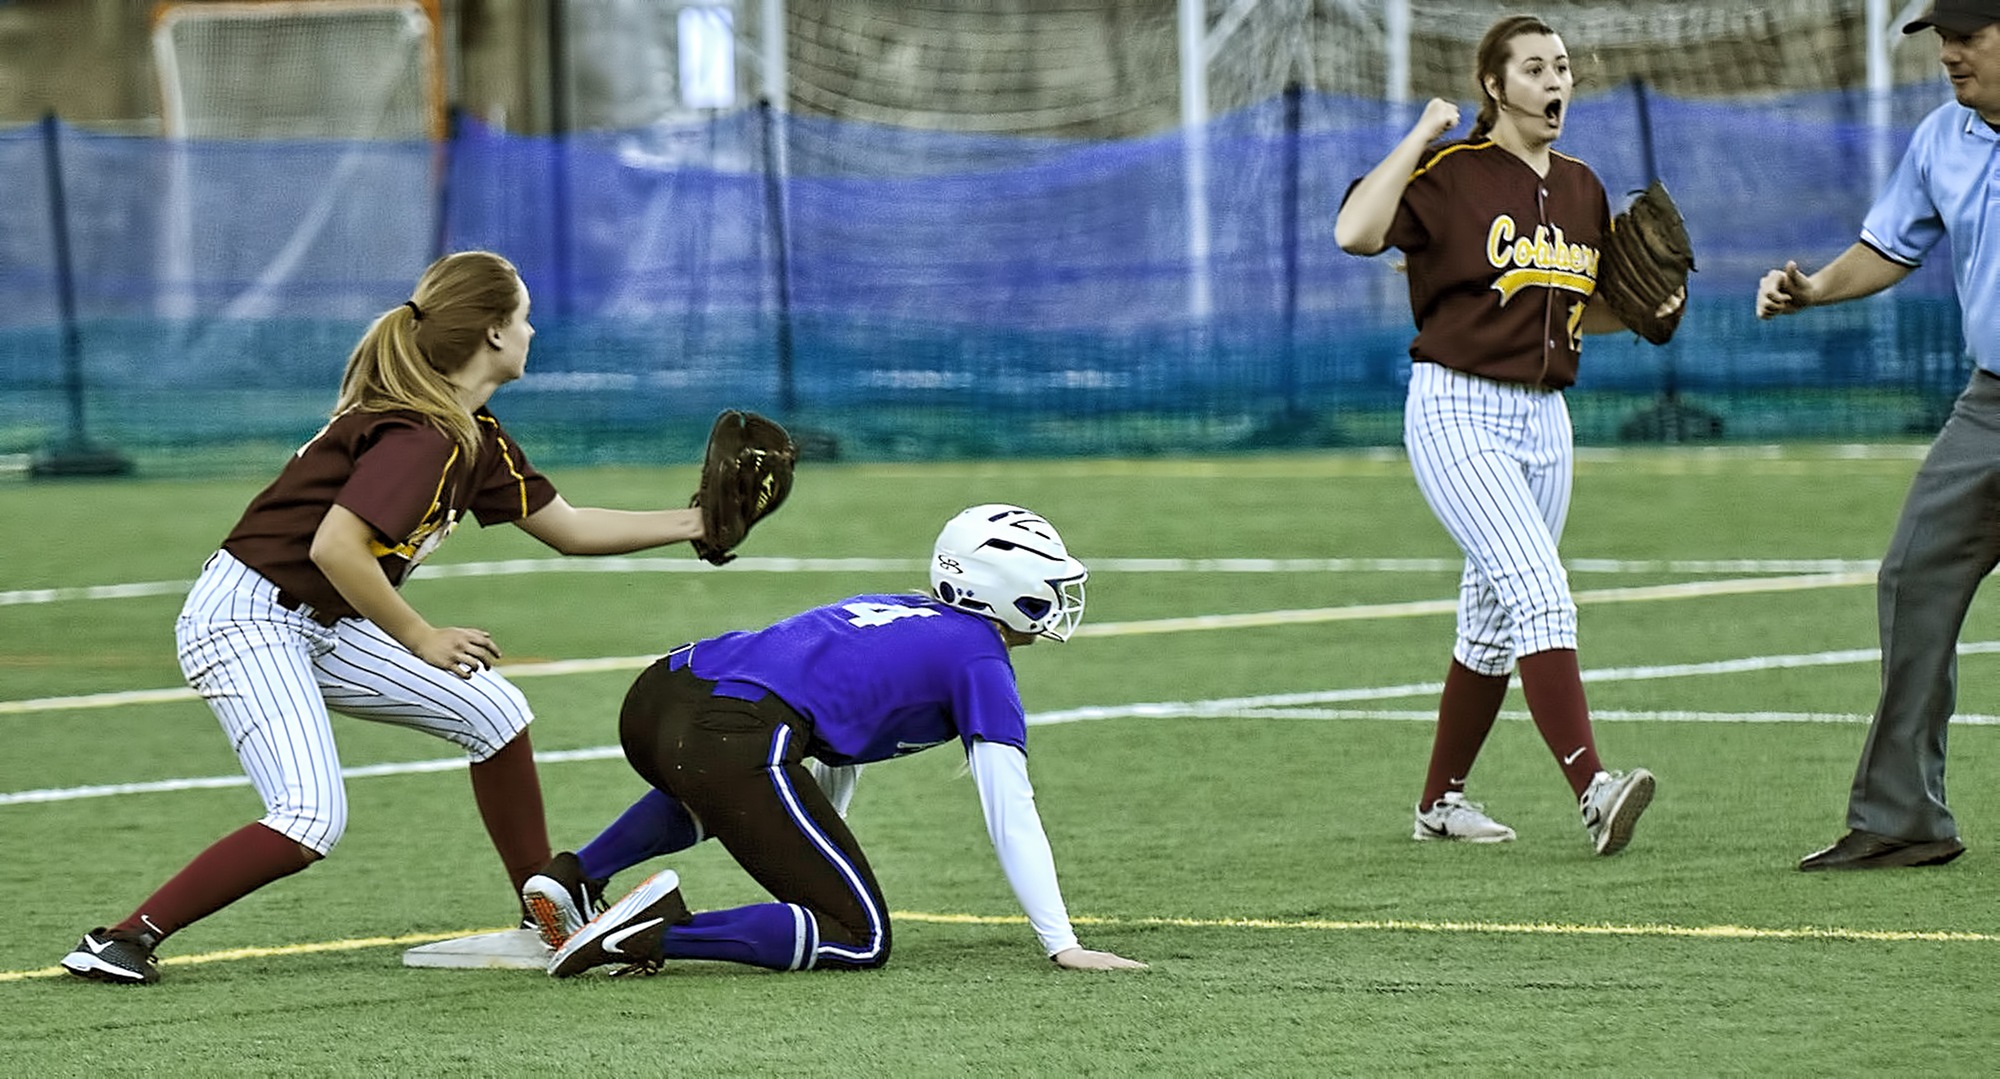 Shortstop Maria Pake show the umpire the ball after making a tag on a would-be stolen base attempt in the Cobbers' first game with Finlandia. Second baseman Kate Wensloff is helping the umpire make the call.